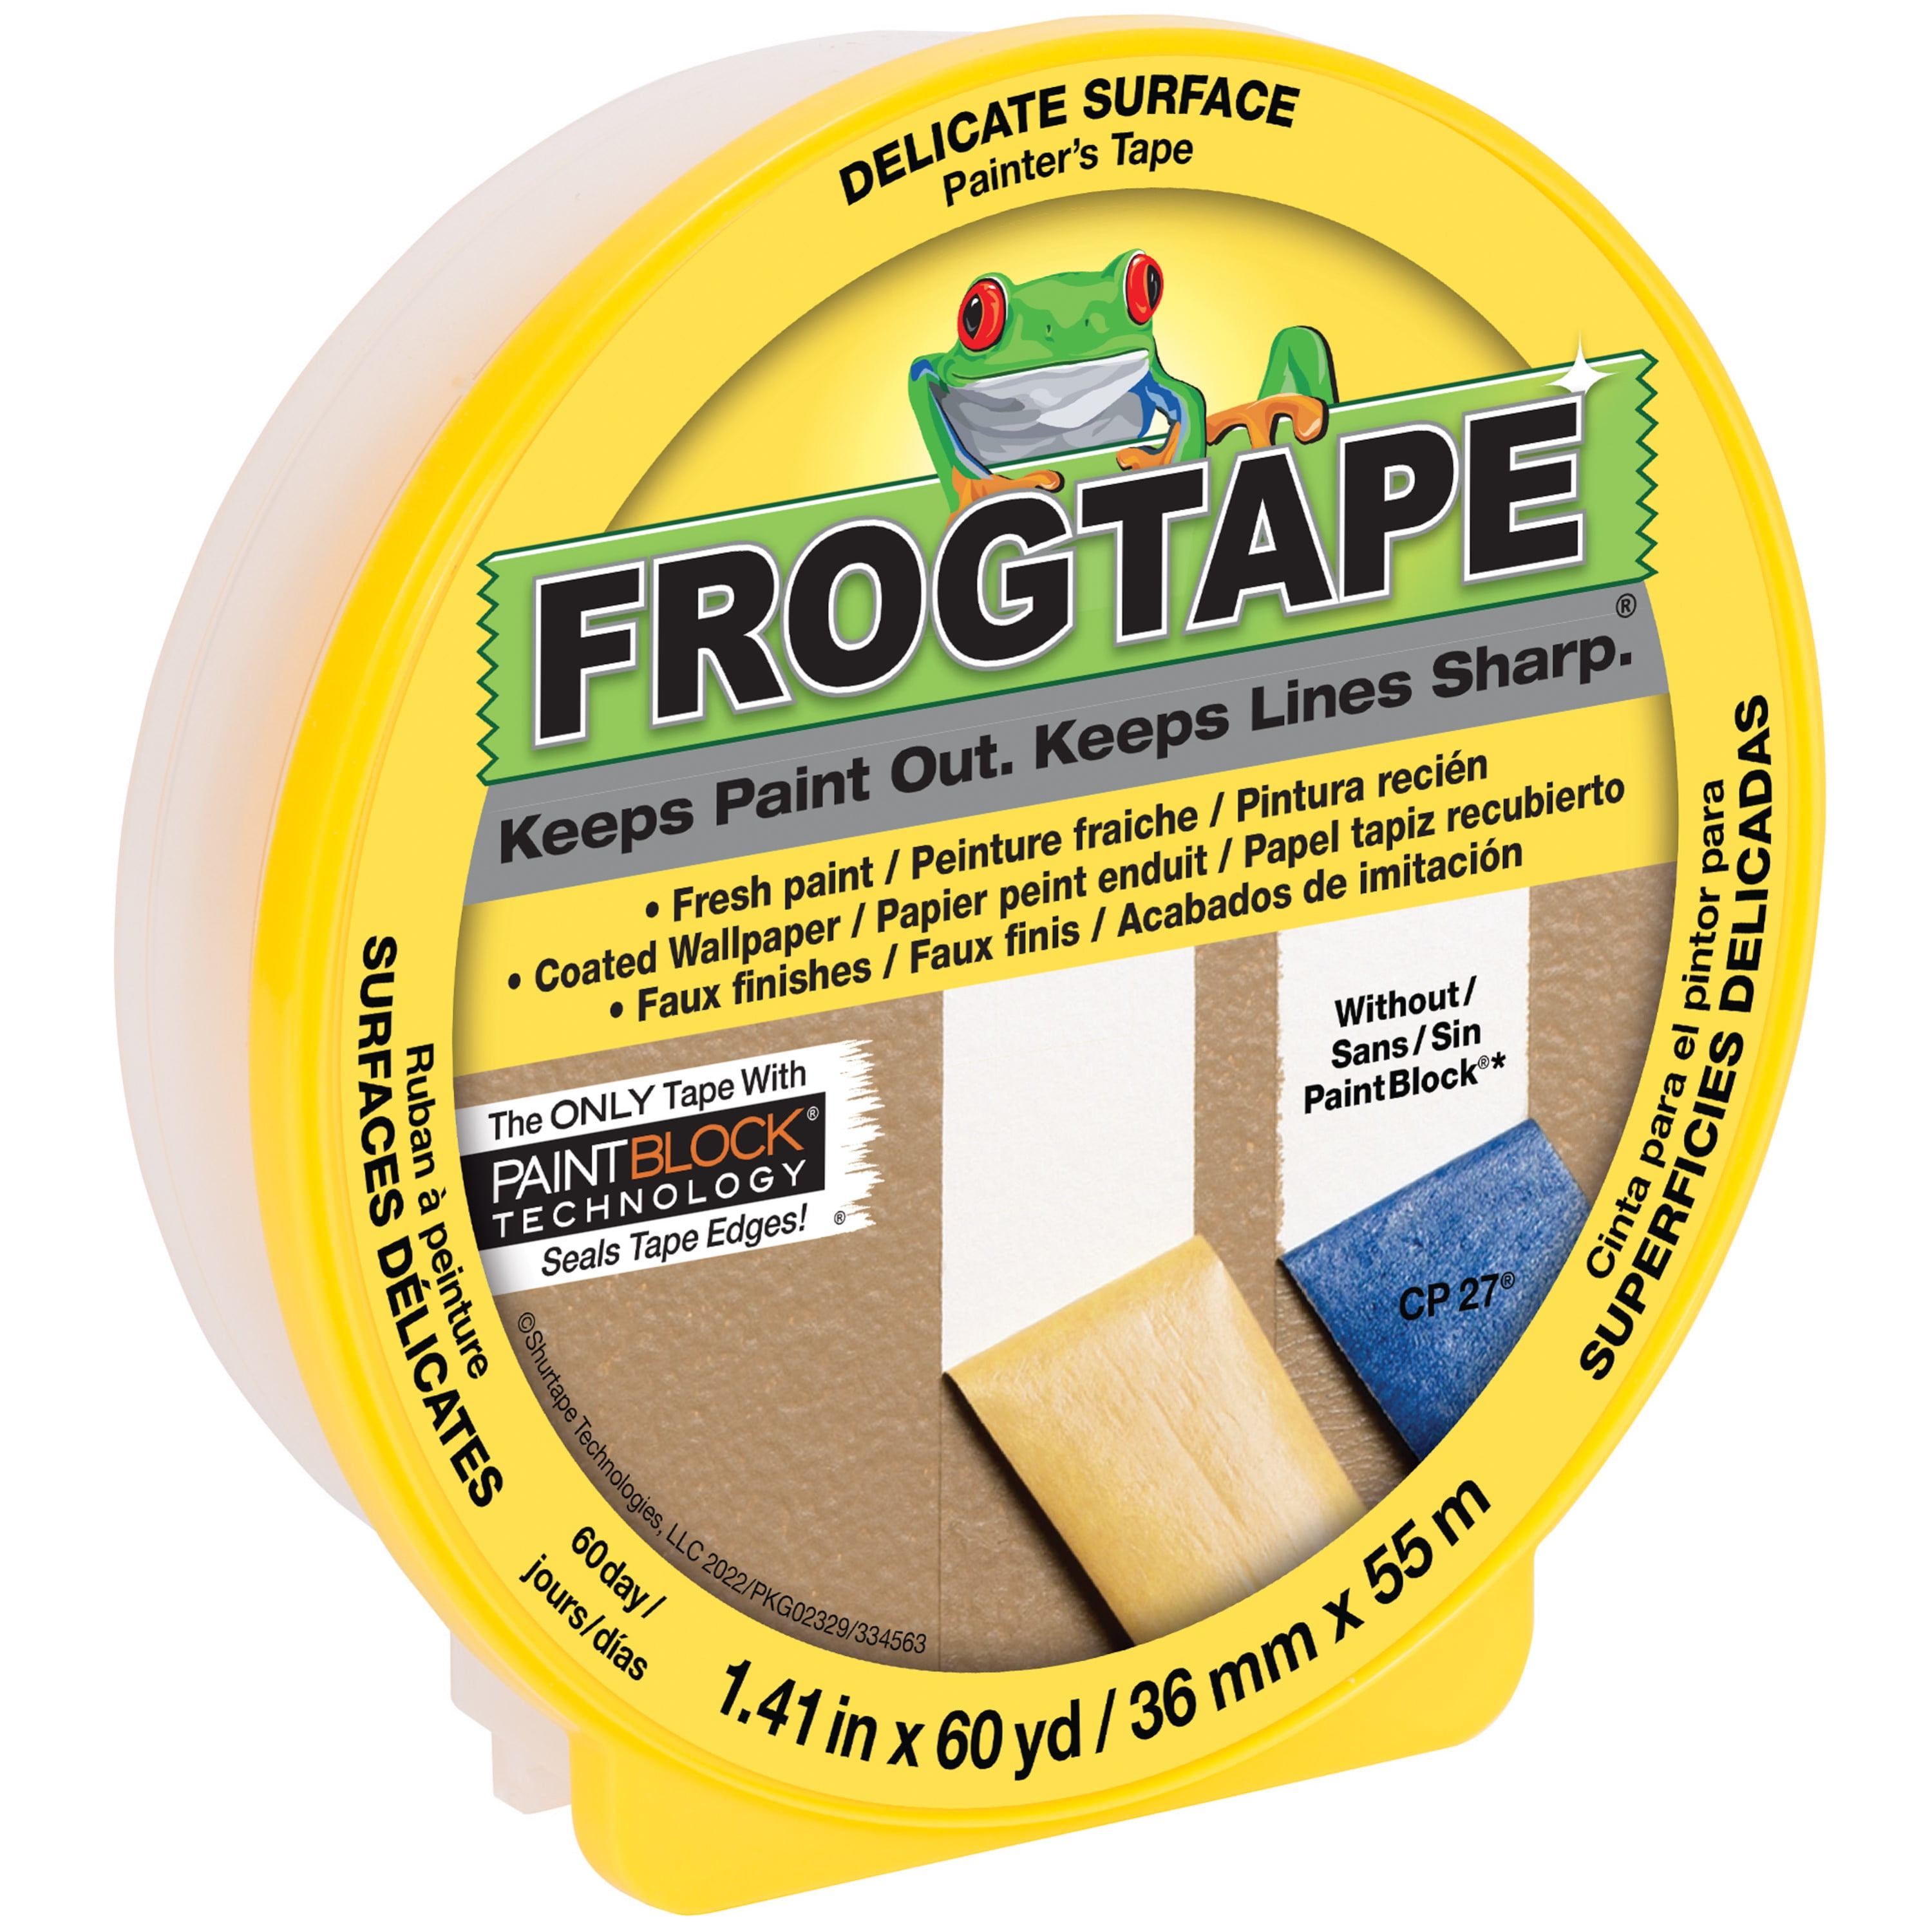 FrogTape 1.41 in. x 60 yd. Yellow Delicate Surface Painter's Tape